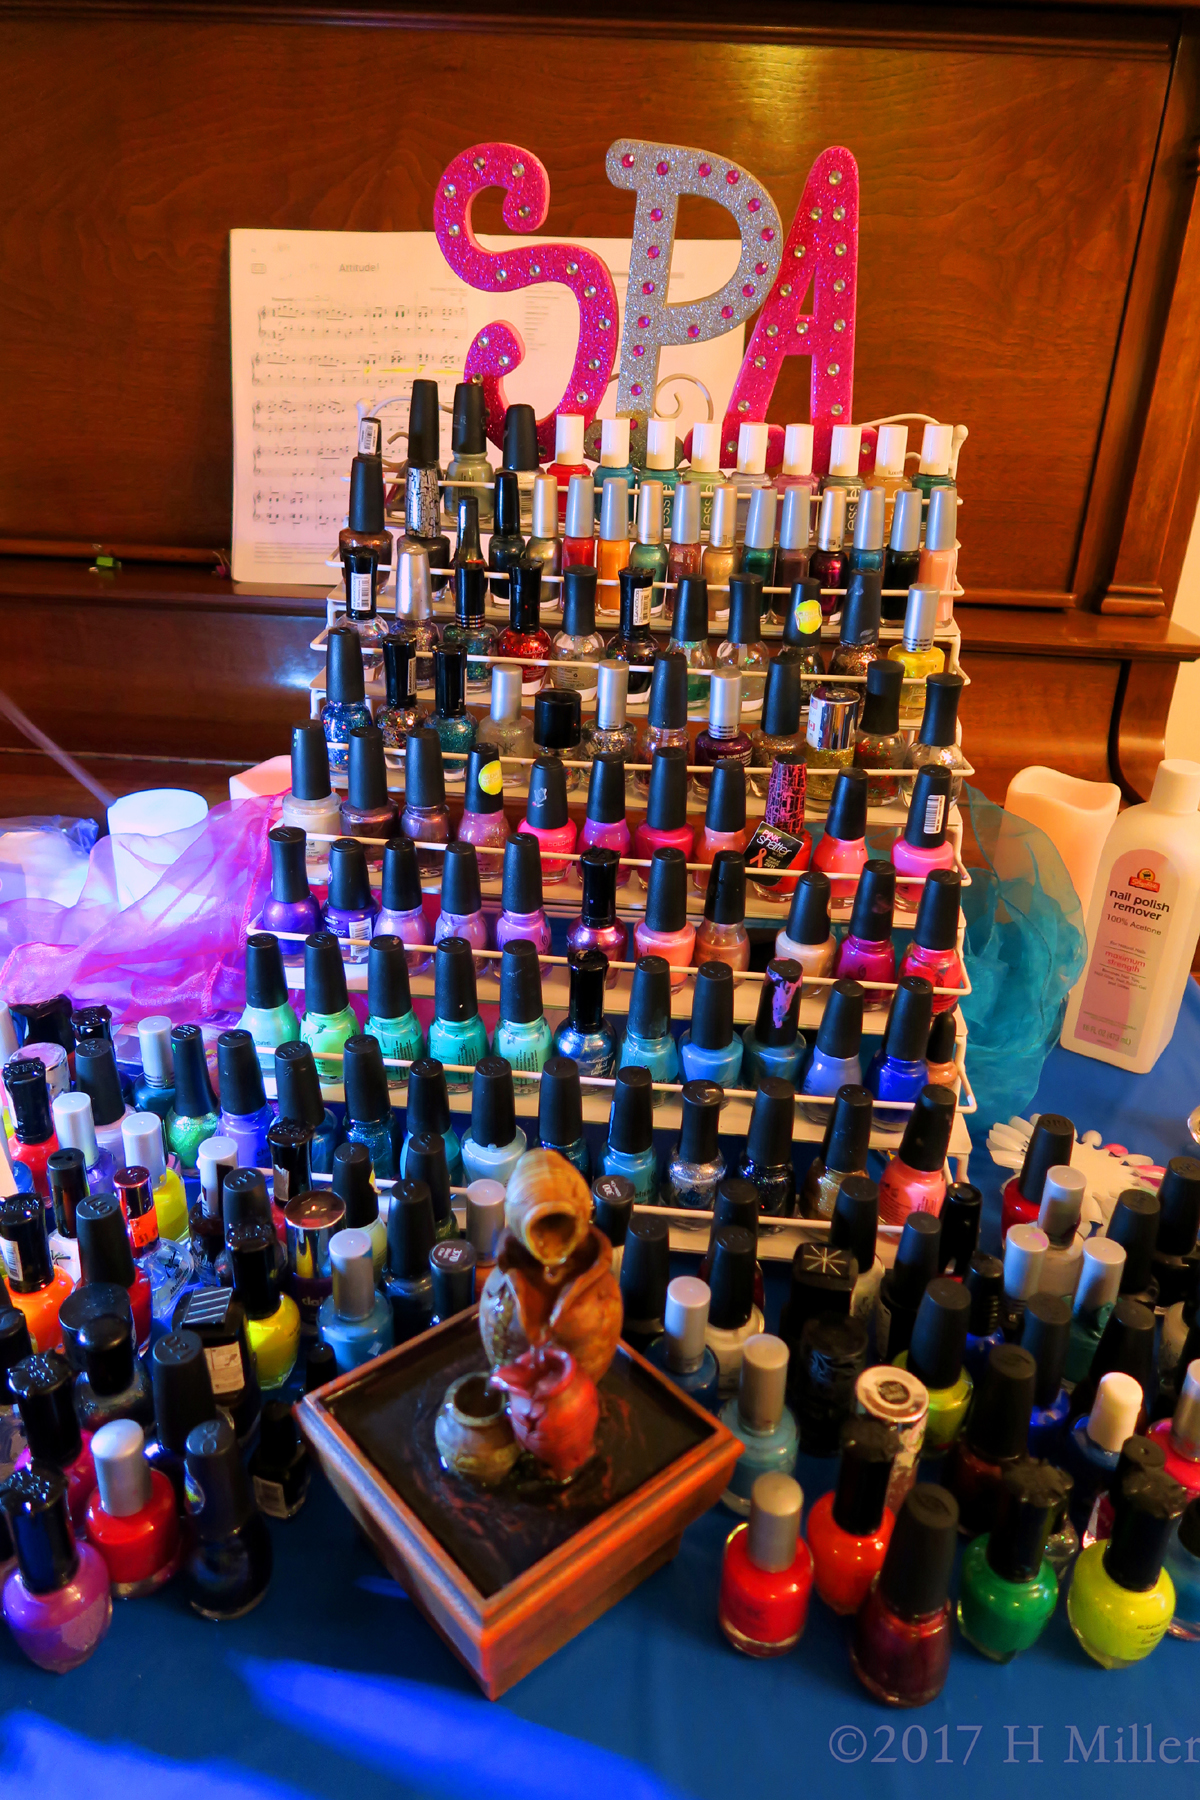 The Awesome Display Of Nail Polish For The Kids Nail Spa! 